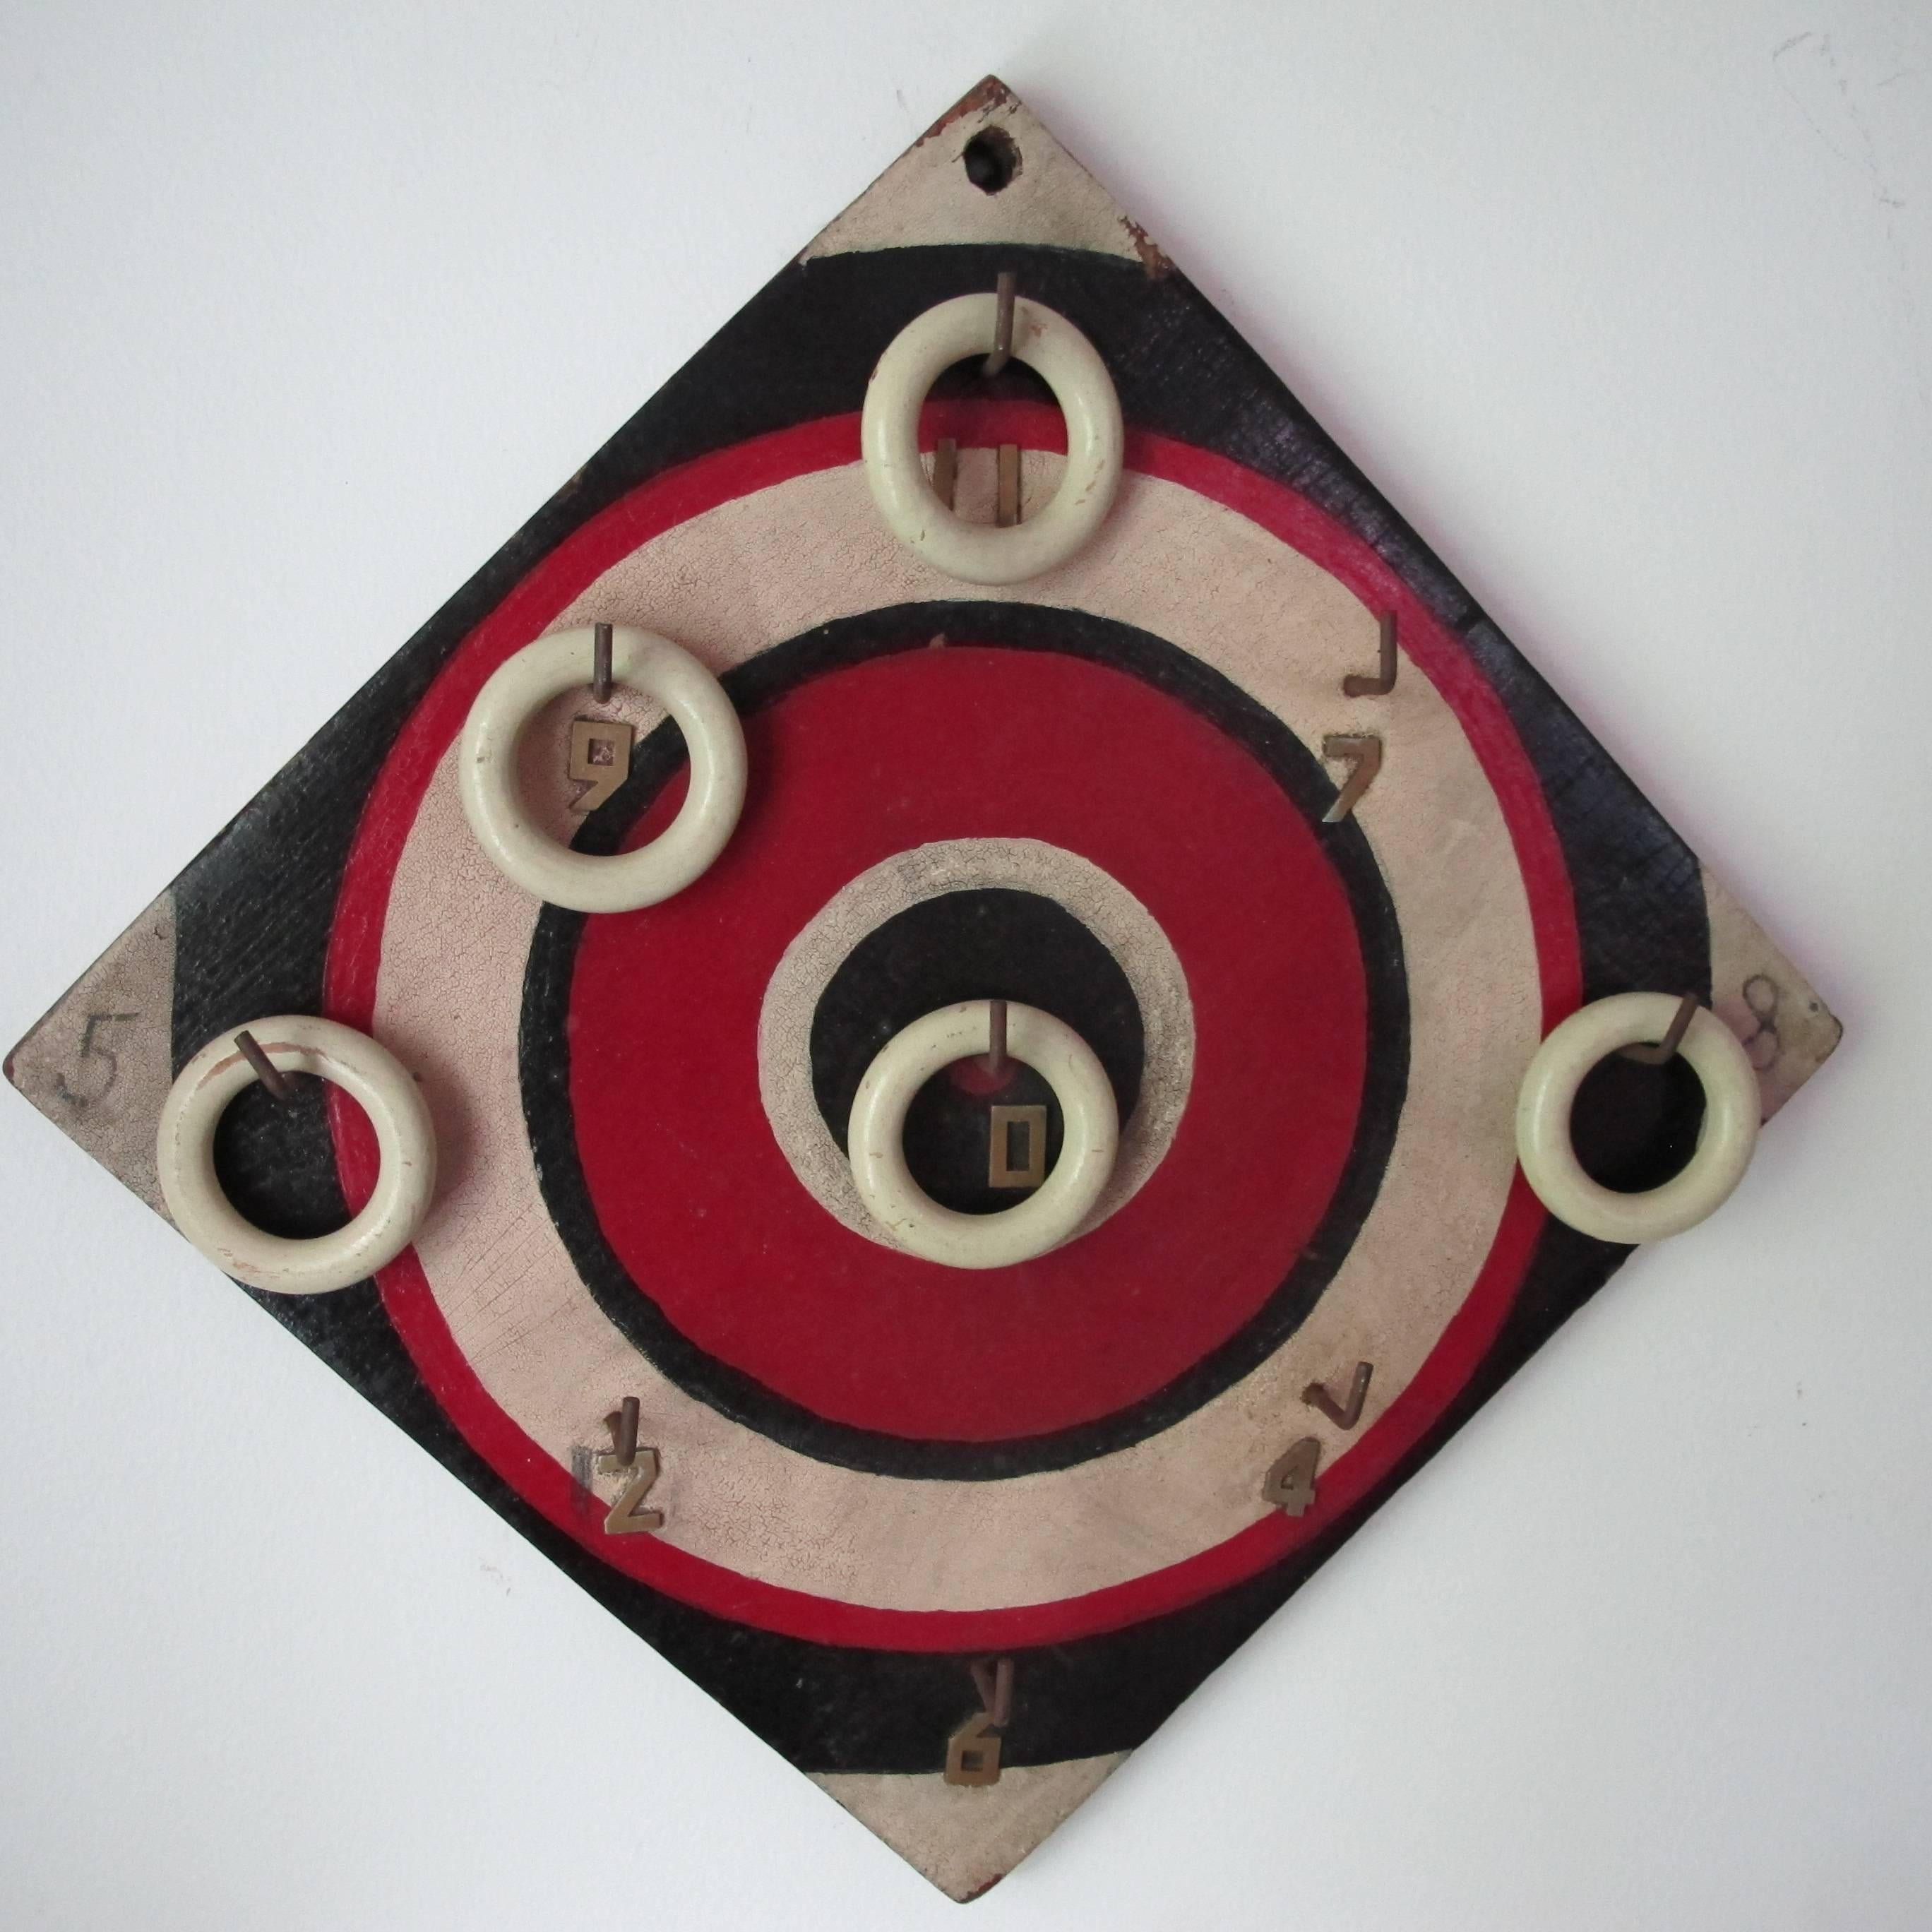 Painted Graphic Bulls Eye Target Ring Toss Game Board For Sale